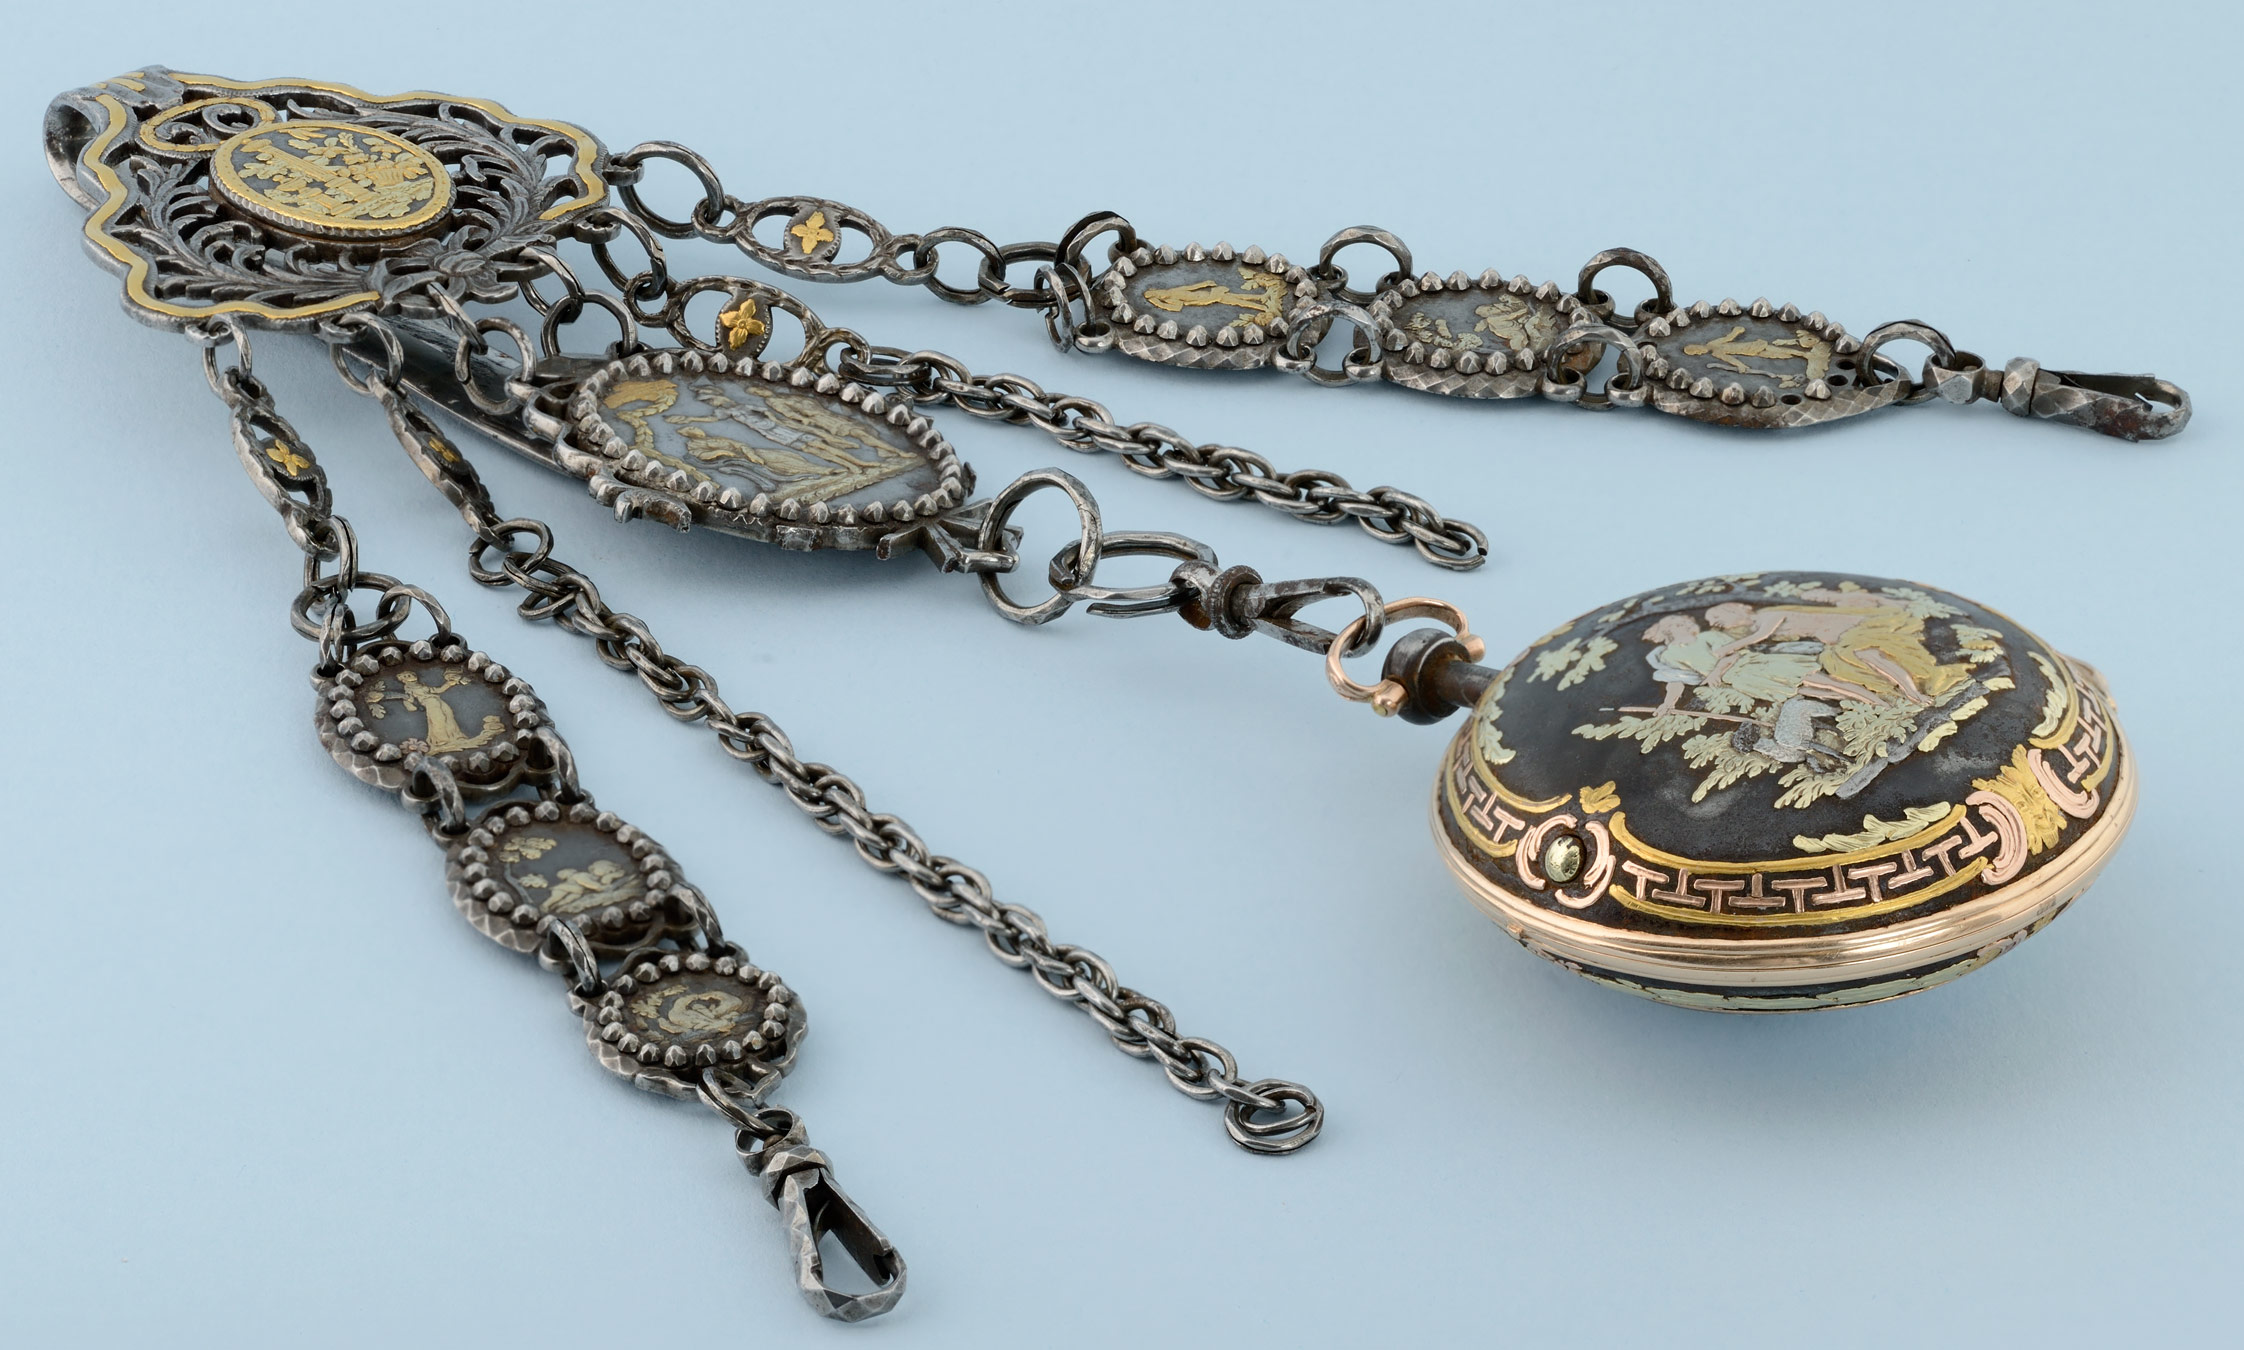 Rare Gold Decorated Watch and Chatelaine | Pieces of Time Ltd